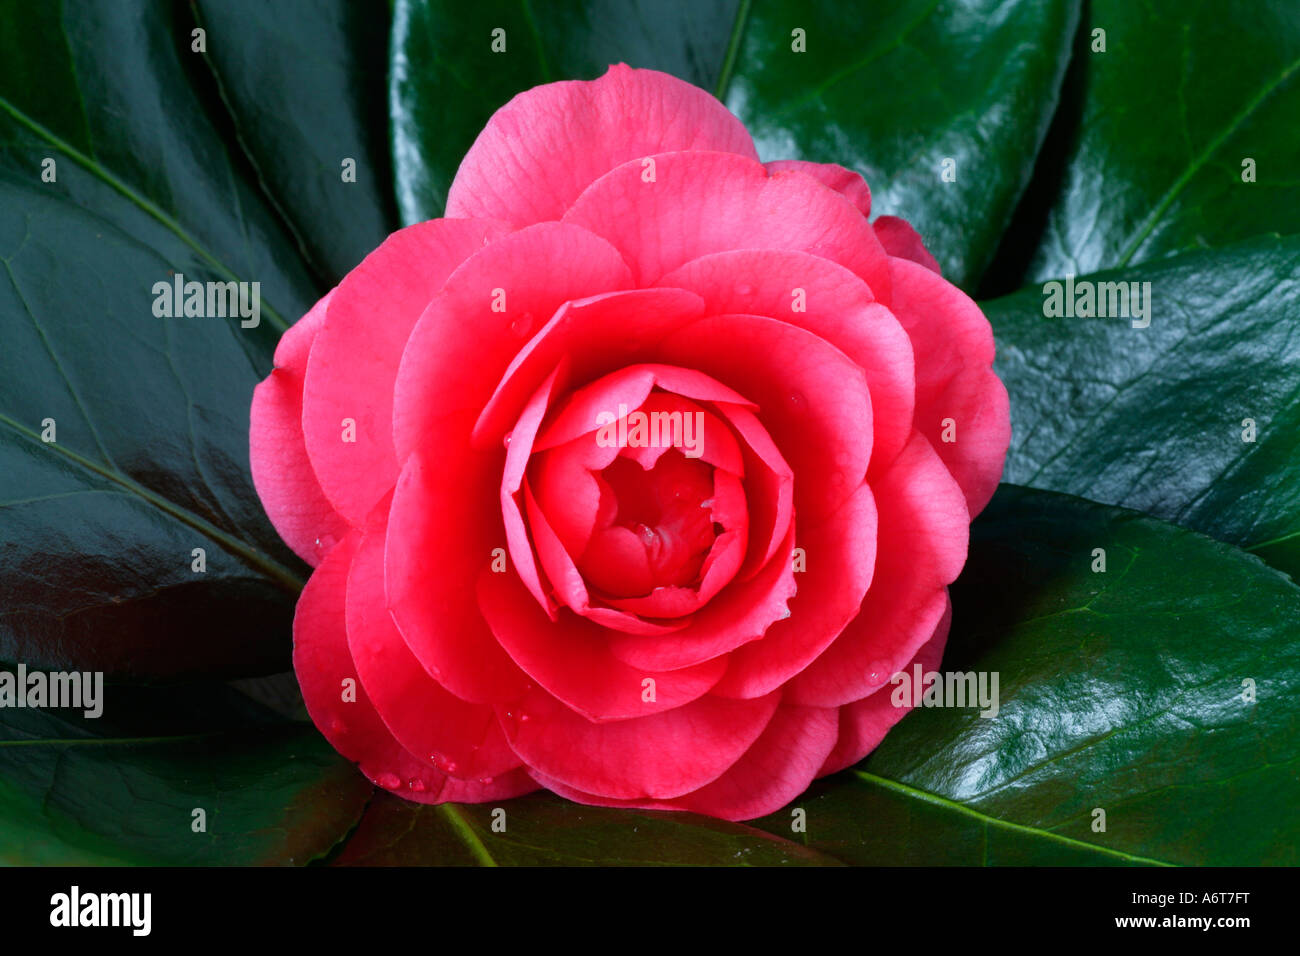 Camelia japonica 'Elegans' flower surrounded by dark green foliage. Stock Photo